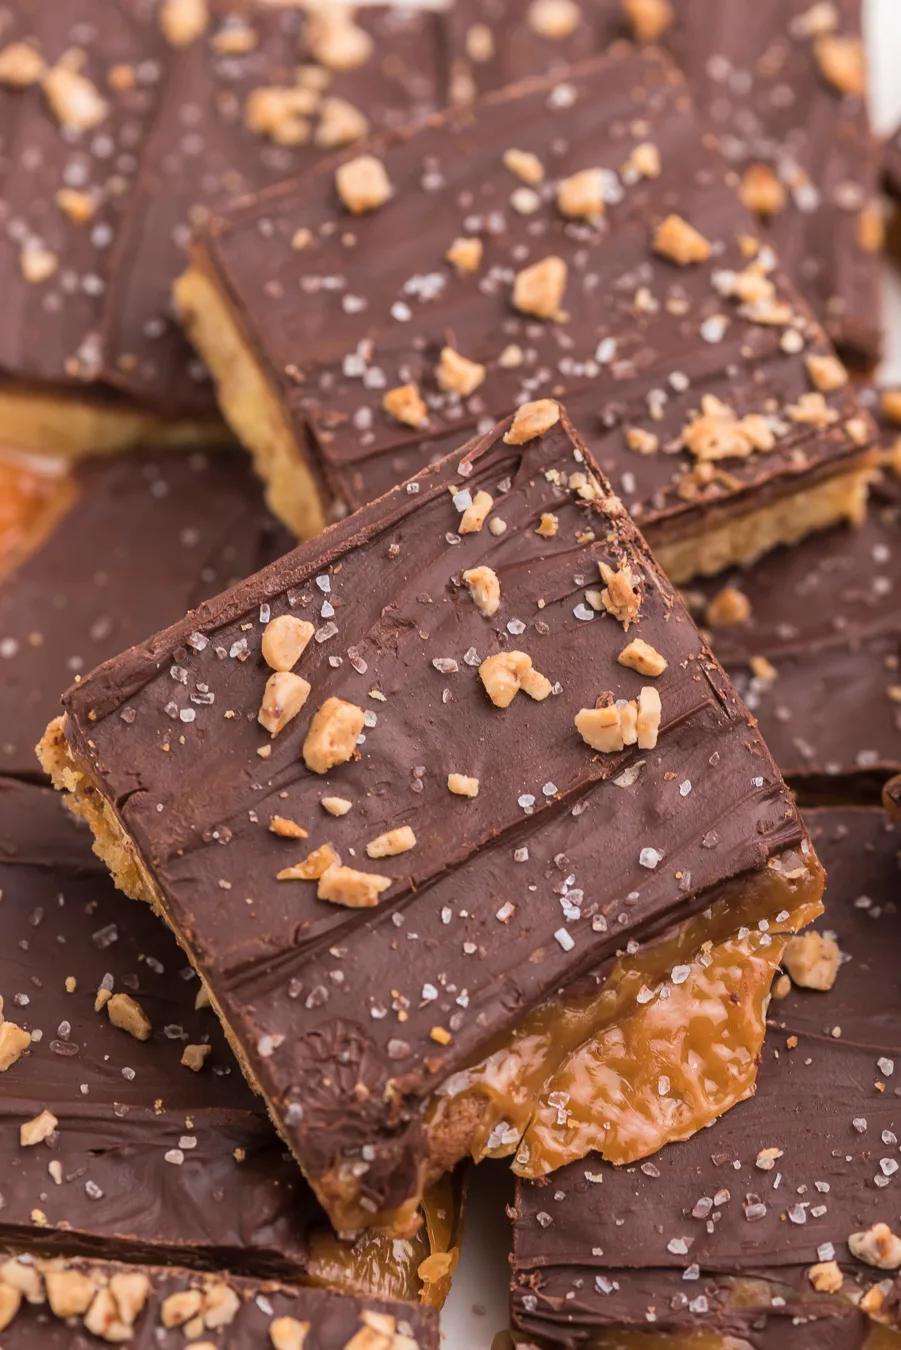 up close of a stack of chocolate covered cookie bars topped with sea salt and toffee bits with caramel oozing out